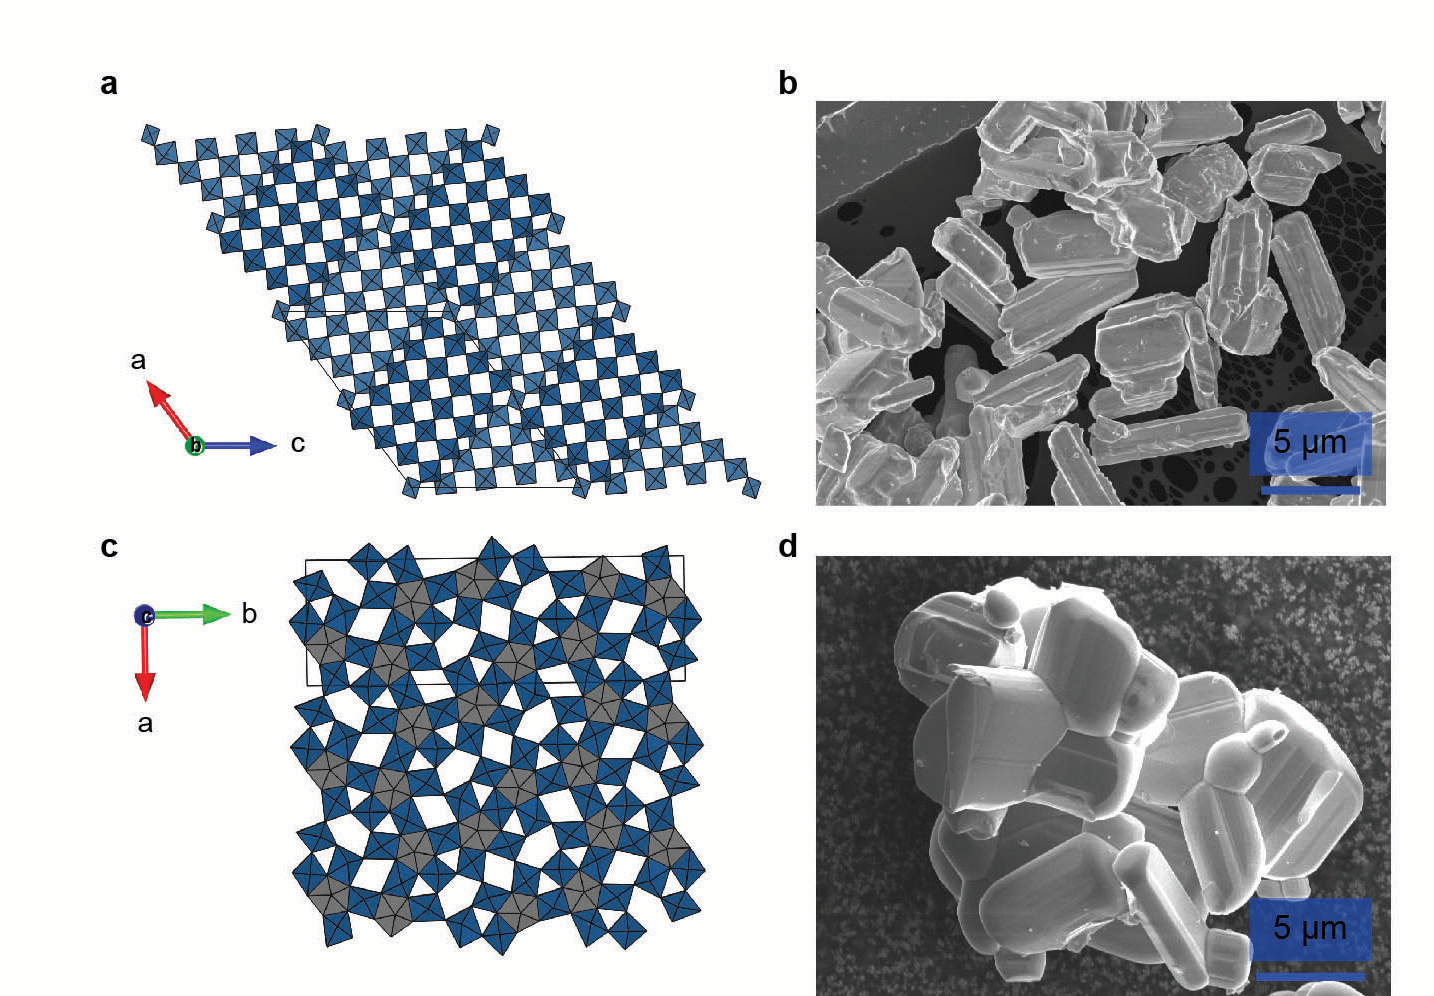 Figure 1: Crystal structure and electron microscope image of two niobium tungsten oxides;
<br/>(a) structure of Nb<sub>16</sub>W<sub>5</sub>O<sub>55</sub> ; (b) image of Nb<sub>16</sub>W<sub>5</sub>O<sub>55</sub> ; (c) structure of Nb<sub>18</sub>W<sub>16</sub>O<sub>93</sub> ; (d) image
<br/>of Nb<sub>18</sub>W<sub>16</sub>O<sub>93</sub>. The polyhedra in (a) and (c) represent a metal atom at the centre and oxygen
<br/>atoms at the corners. Nb<sub>16</sub>W<sub>5</sub>O<sub>55</sub> has tunnels along the b-axis and Nb<sub>18</sub>W<sub>16</sub>O<sub>93</sub> has tunnels
<br/>along the c-axis; the crystallographic indices are given.